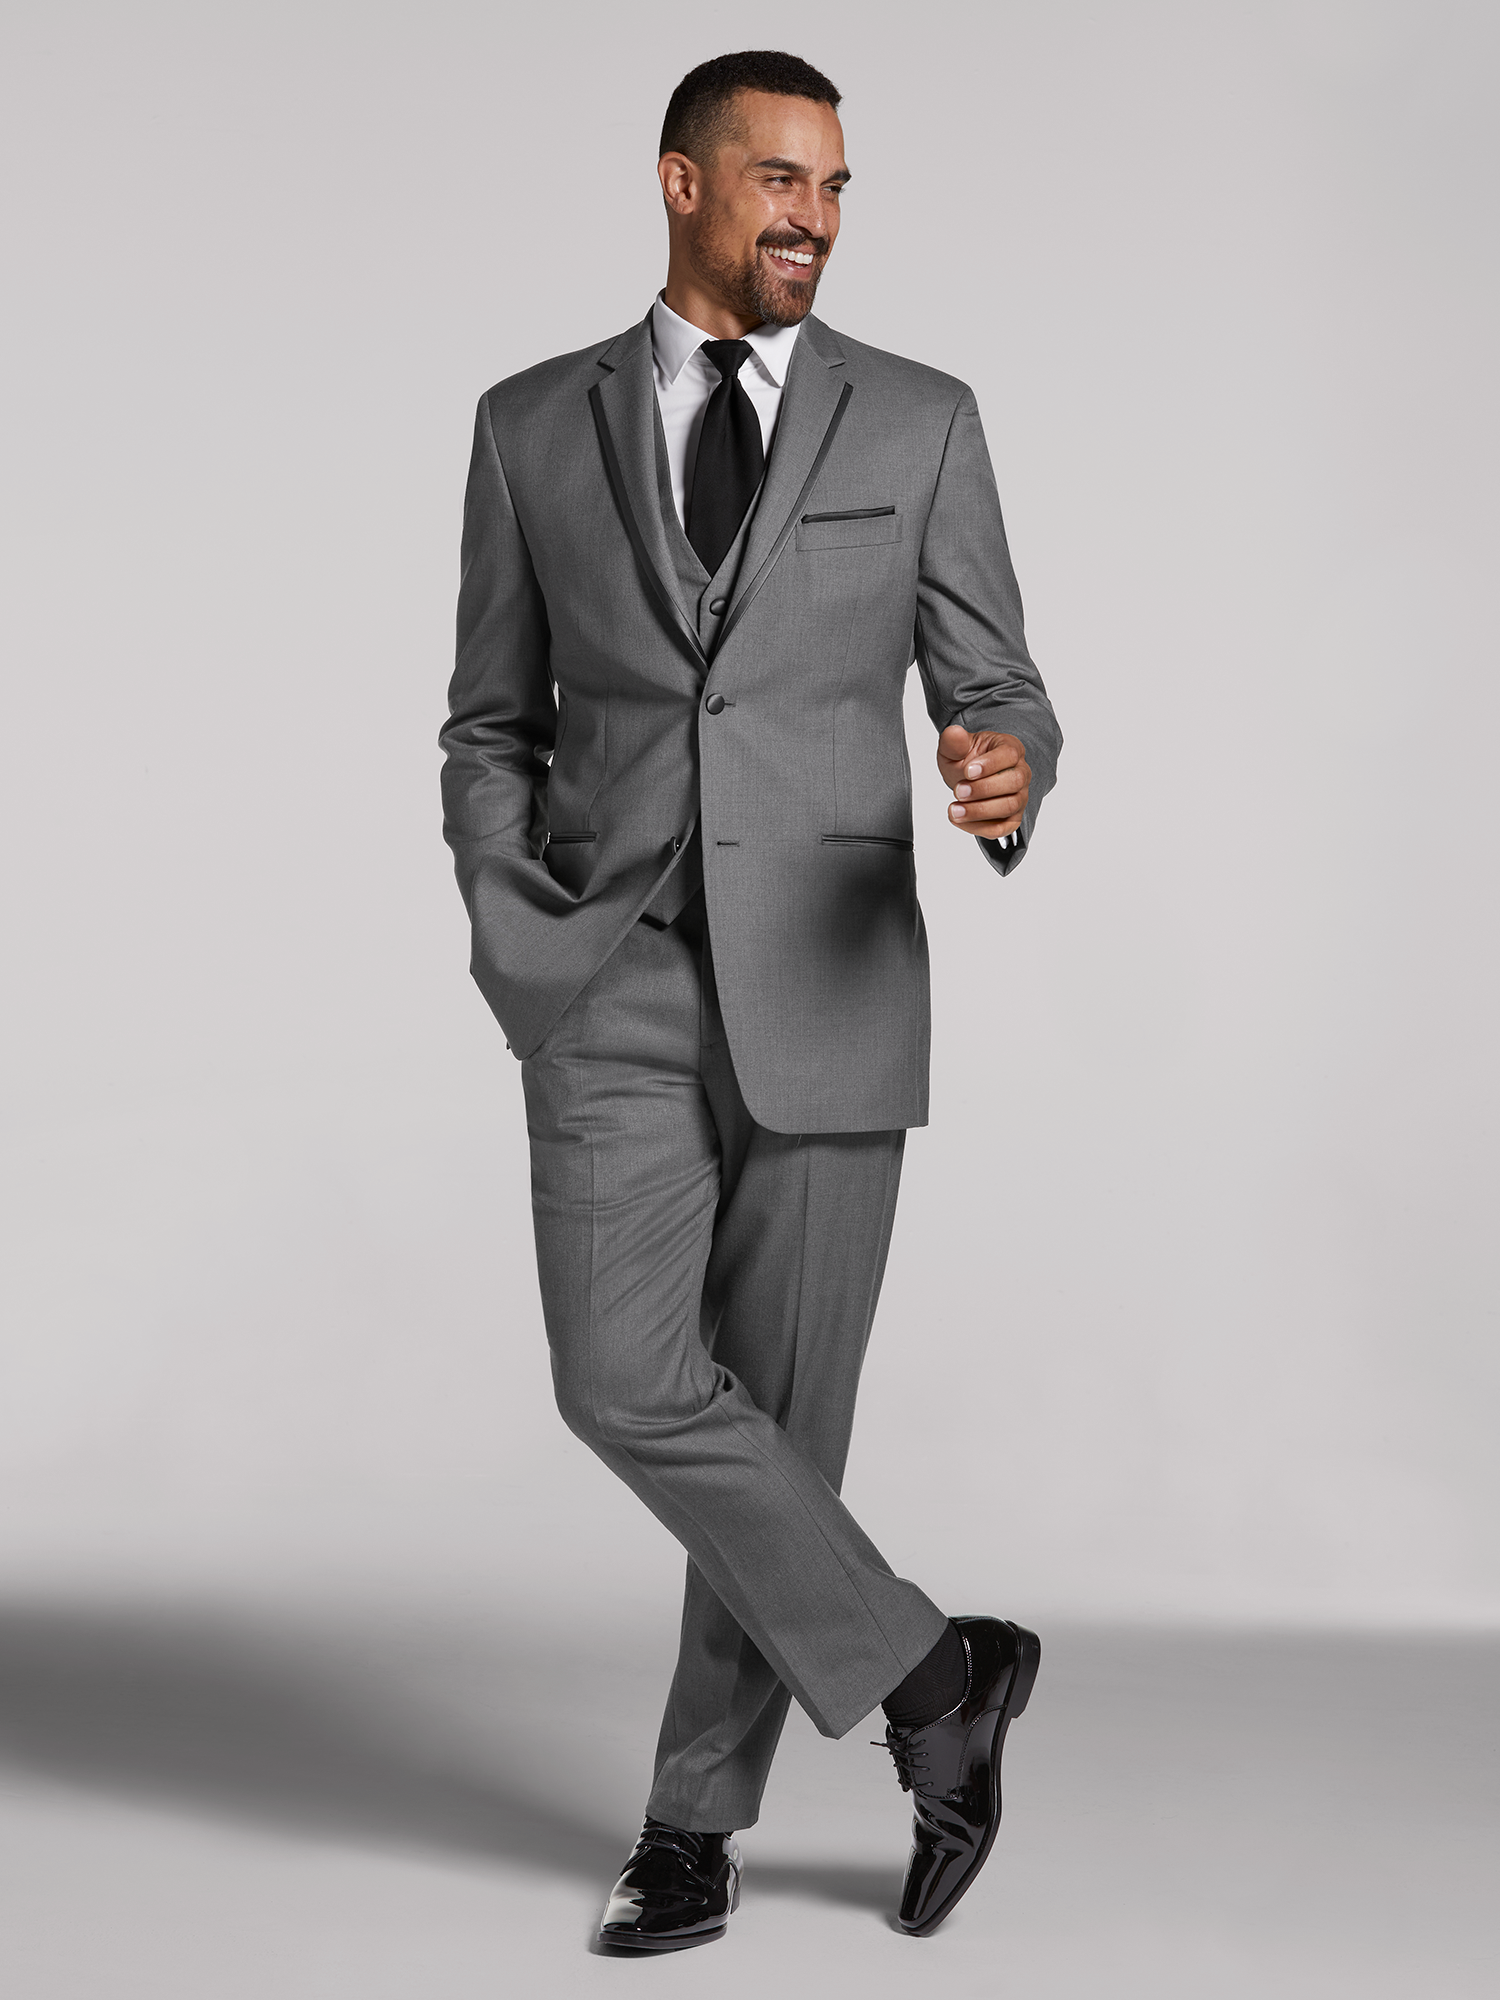 Men's Timeless White and Black Three-Piece Tuxedo Suit In Canada